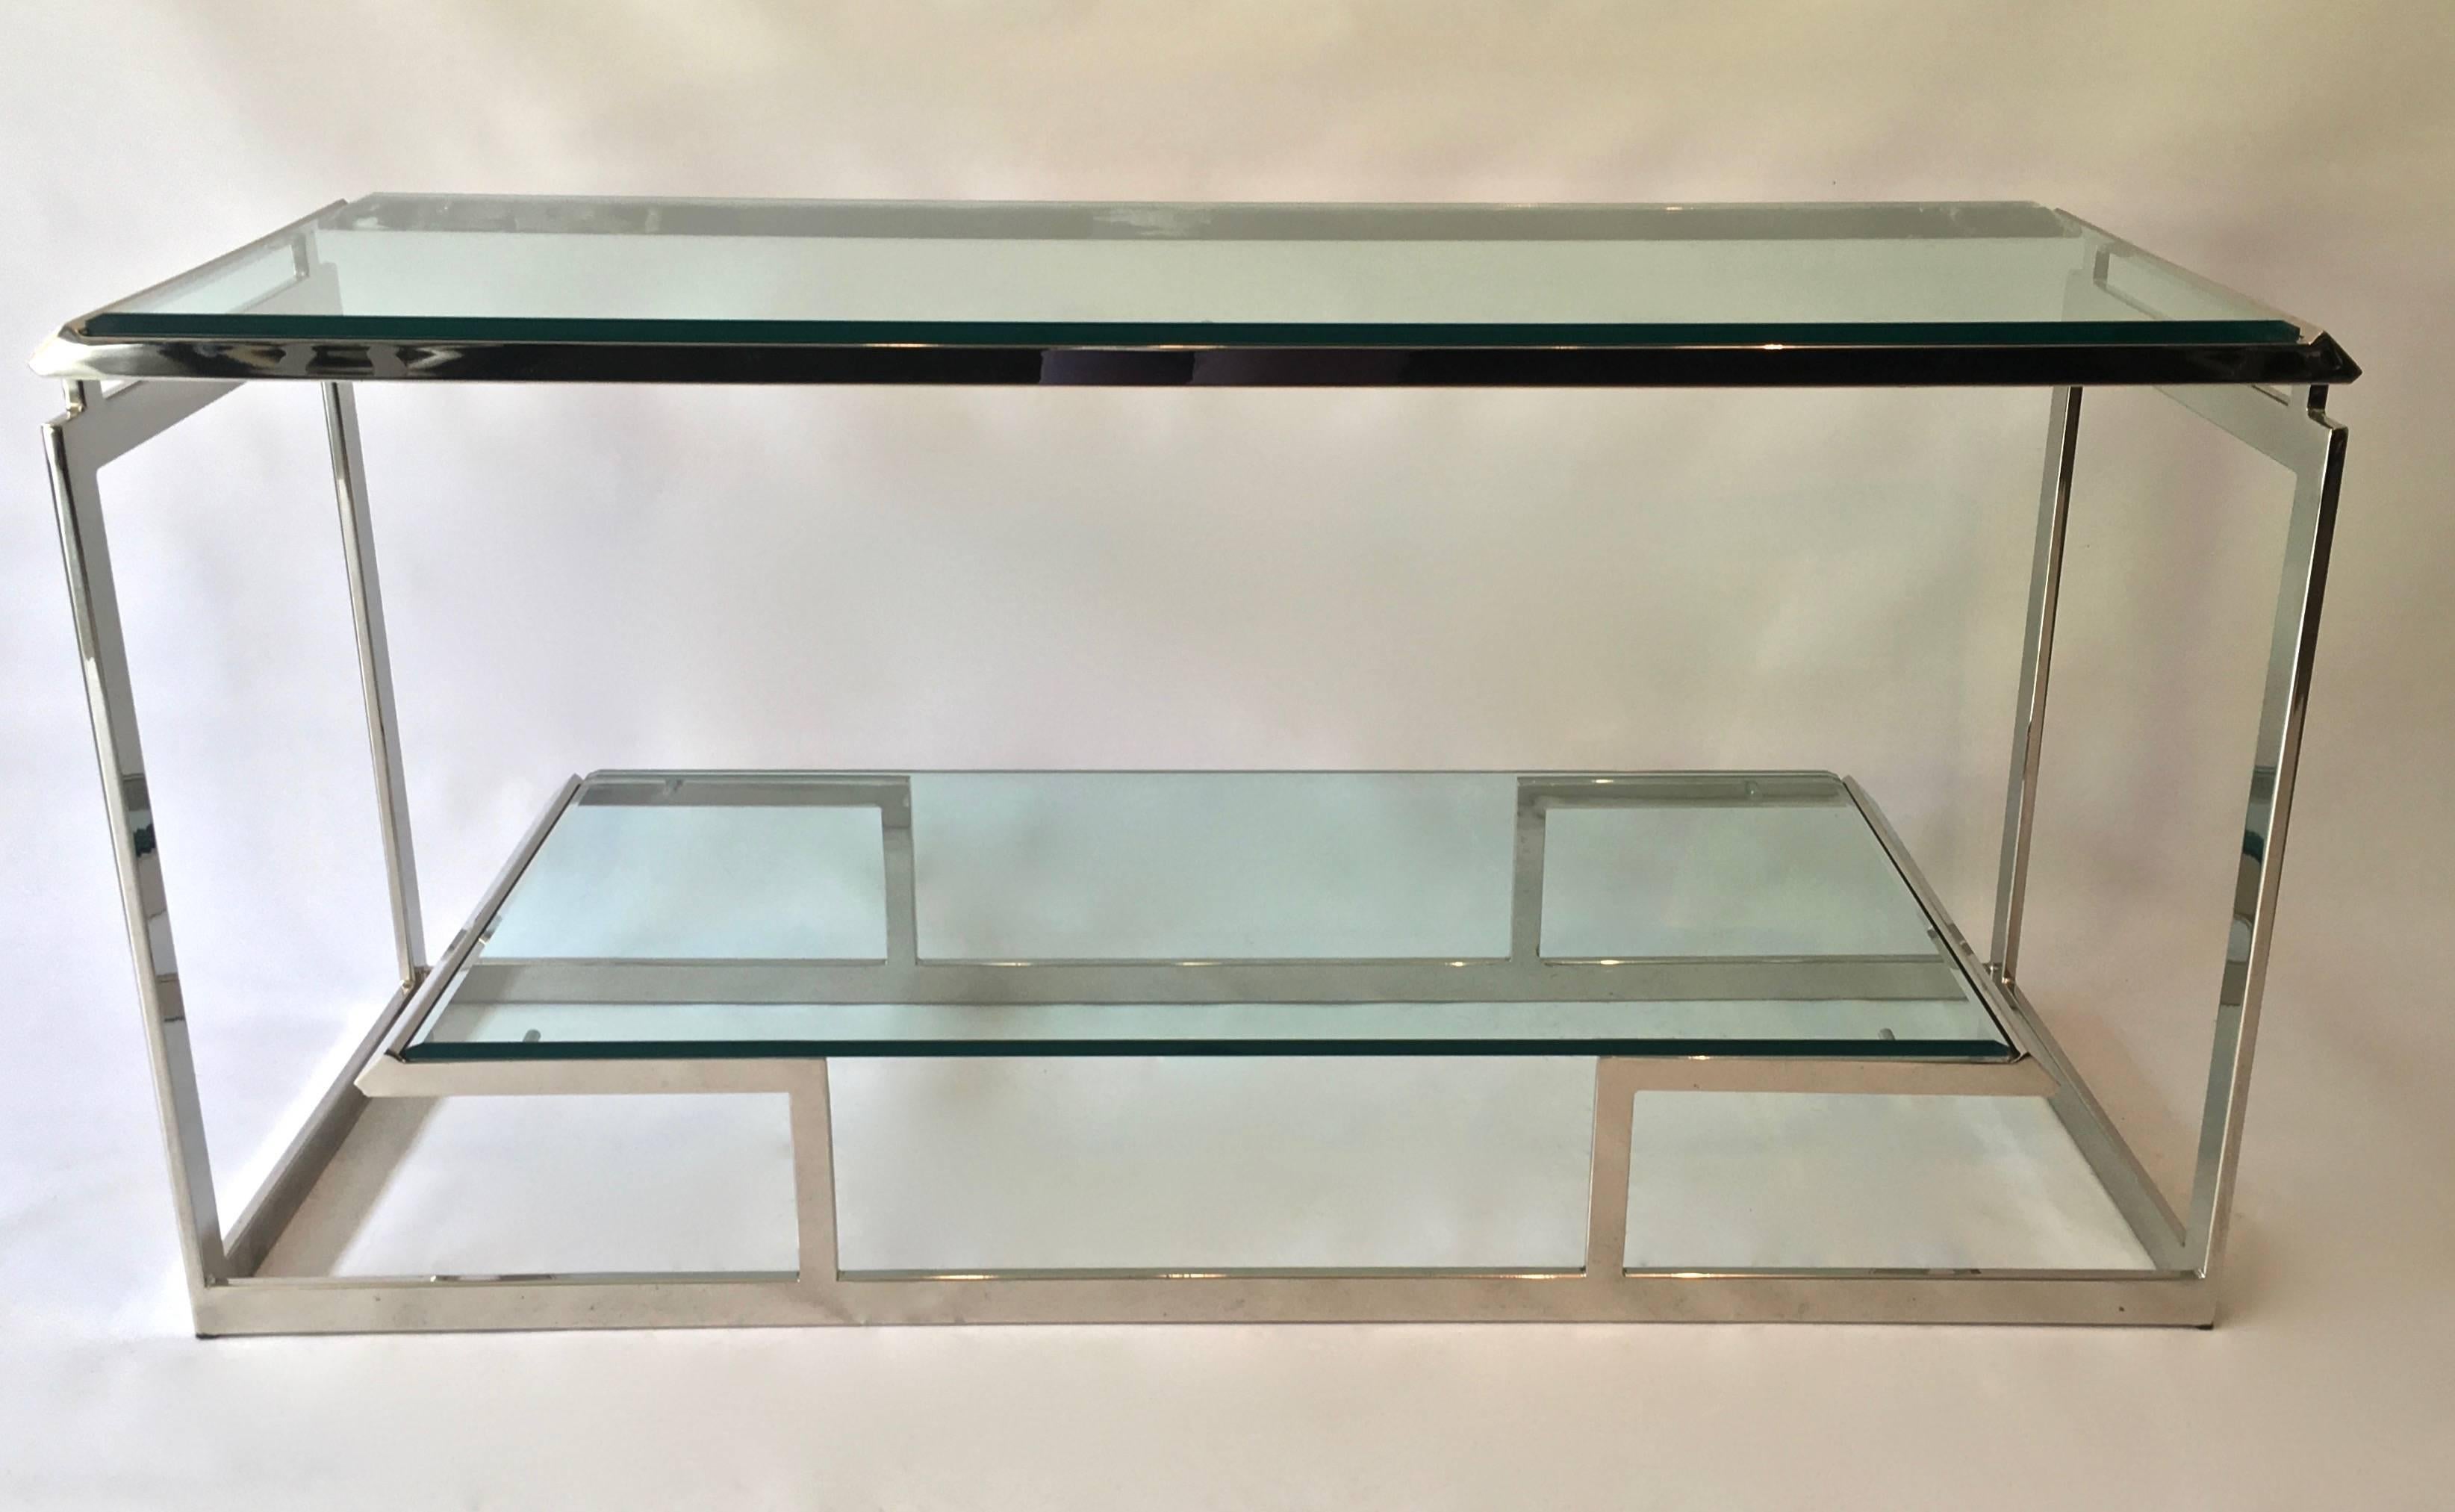 Chrome Mid Century Modern Console Table, newly professionally polished to perfection, this is a gorgeous geometric two level console table with 1/2 inch beveled glass shelving insets. Manner of Milo Baughman and Romeo Rega.